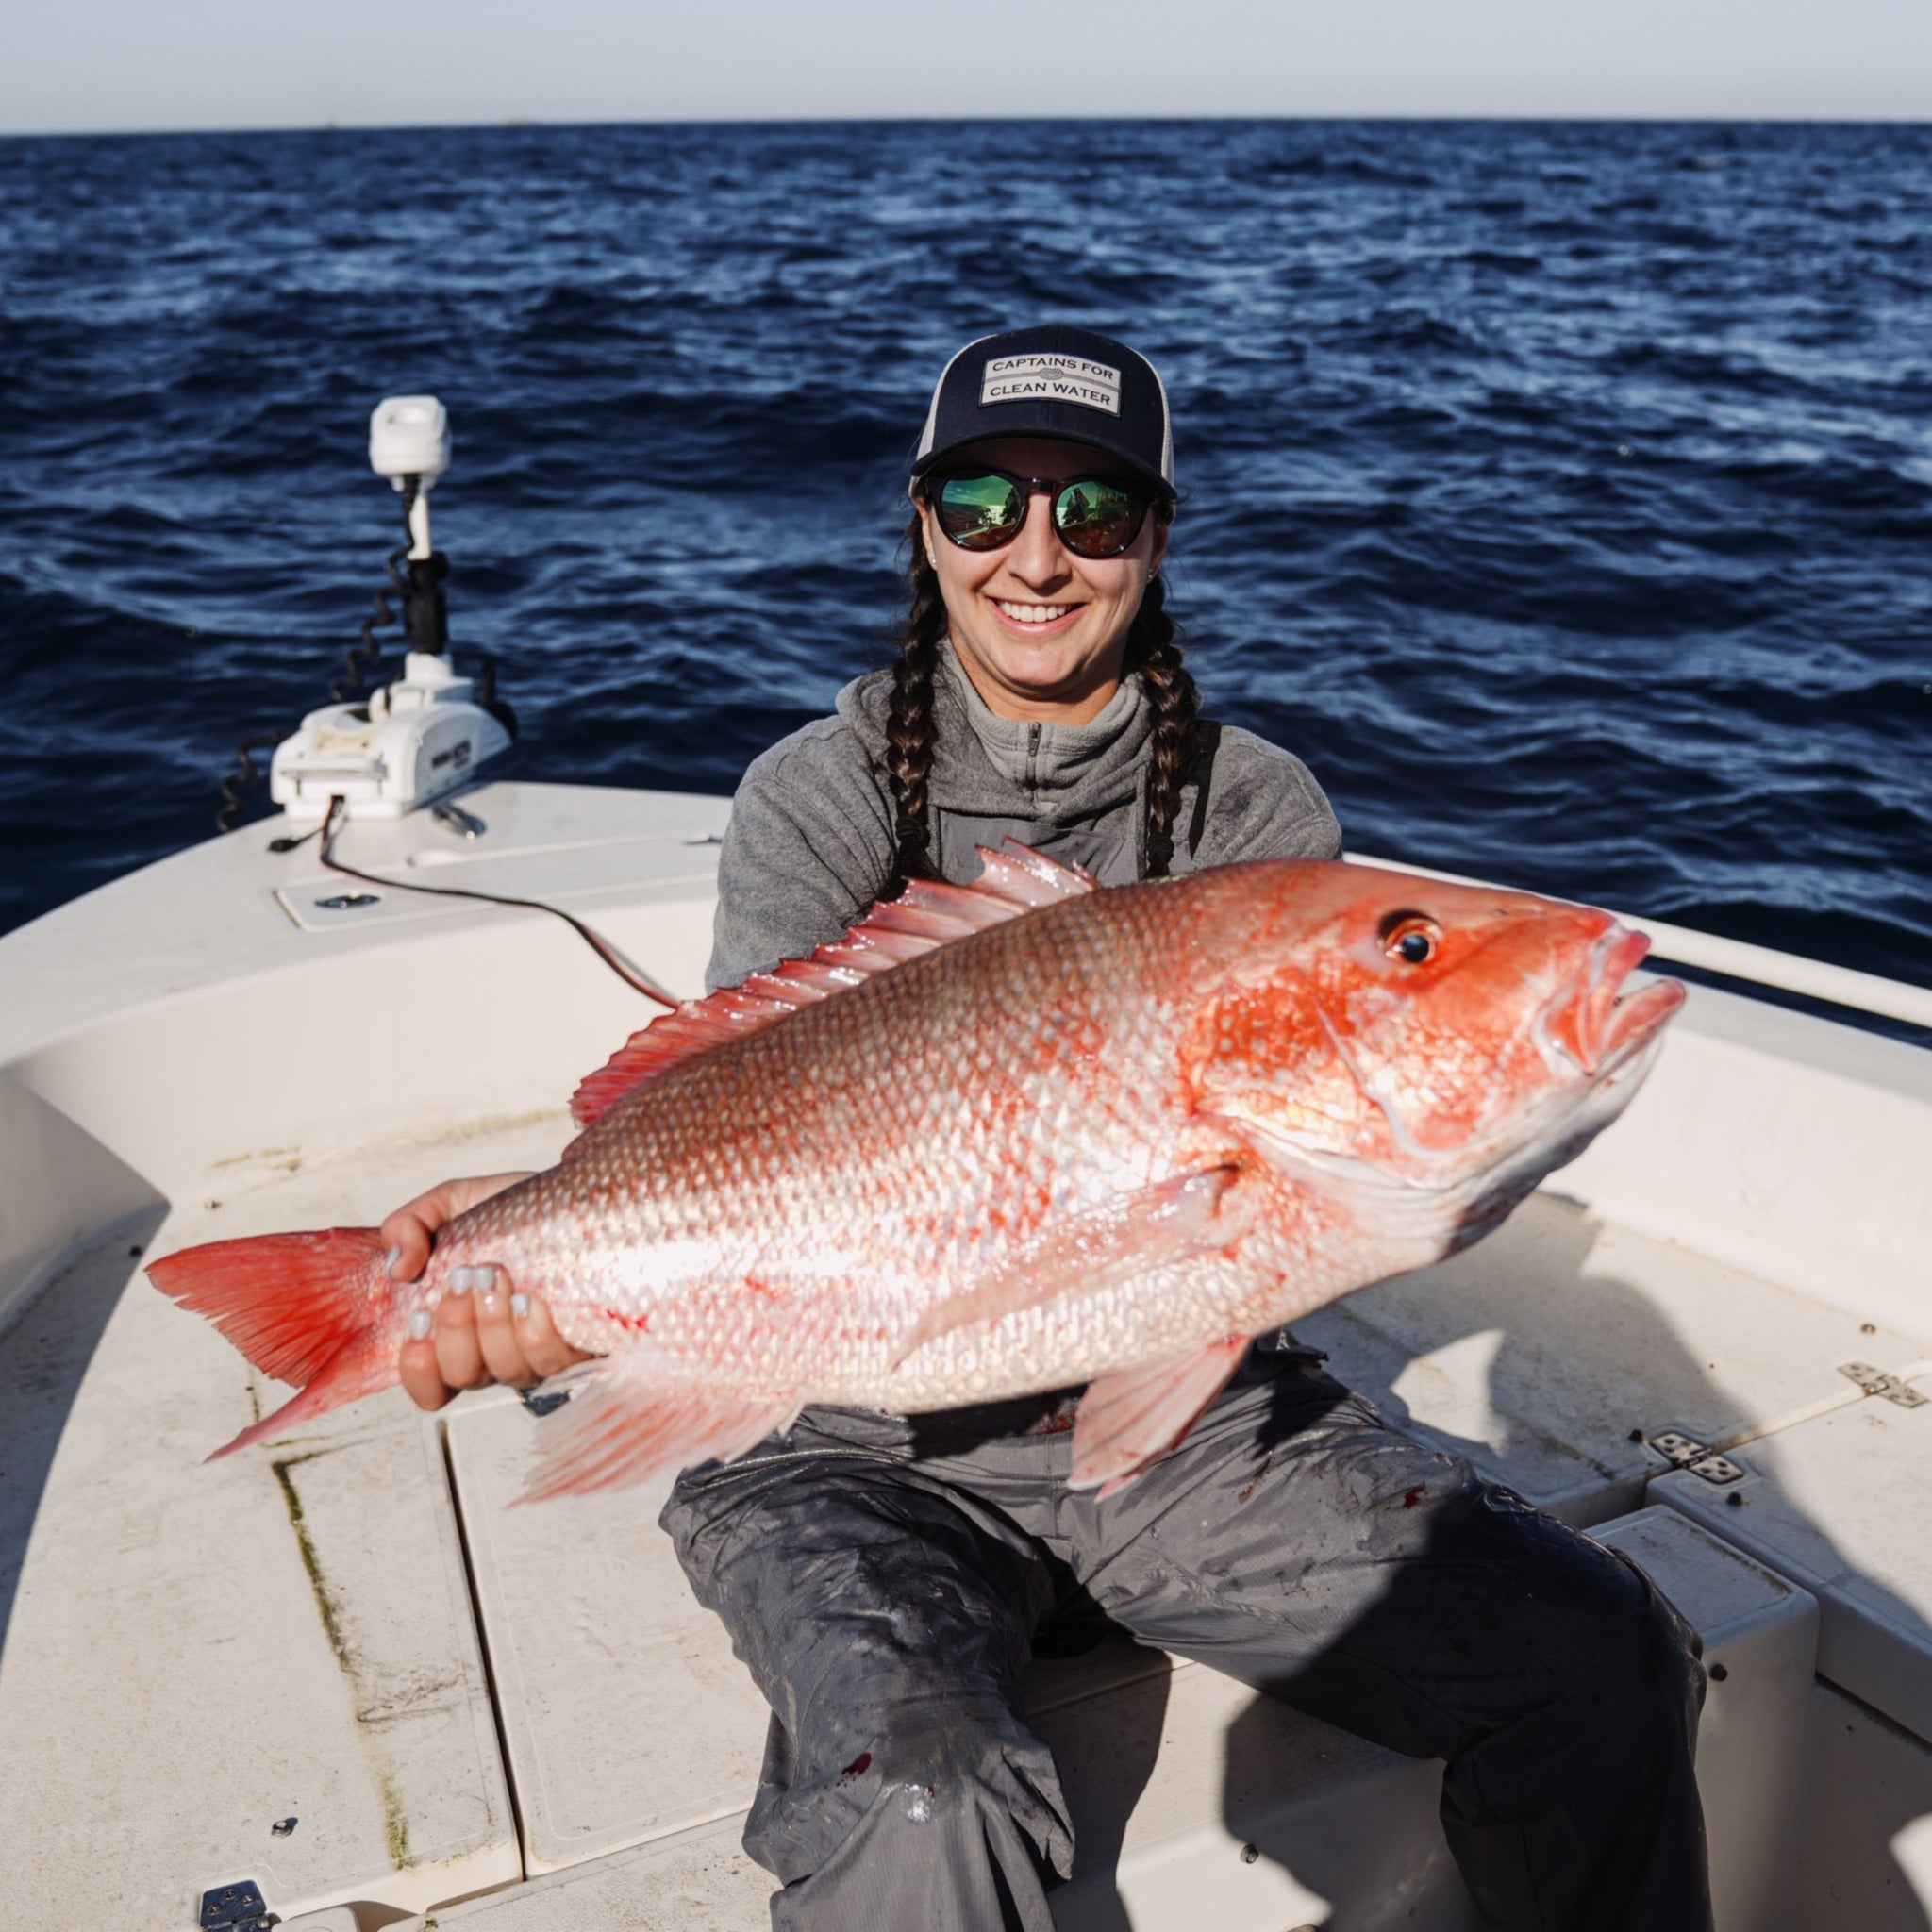 A female Angler is holding a giant Red Snapper while fishing offshore on a boat. She is wearing a Captains for Clean Water hat